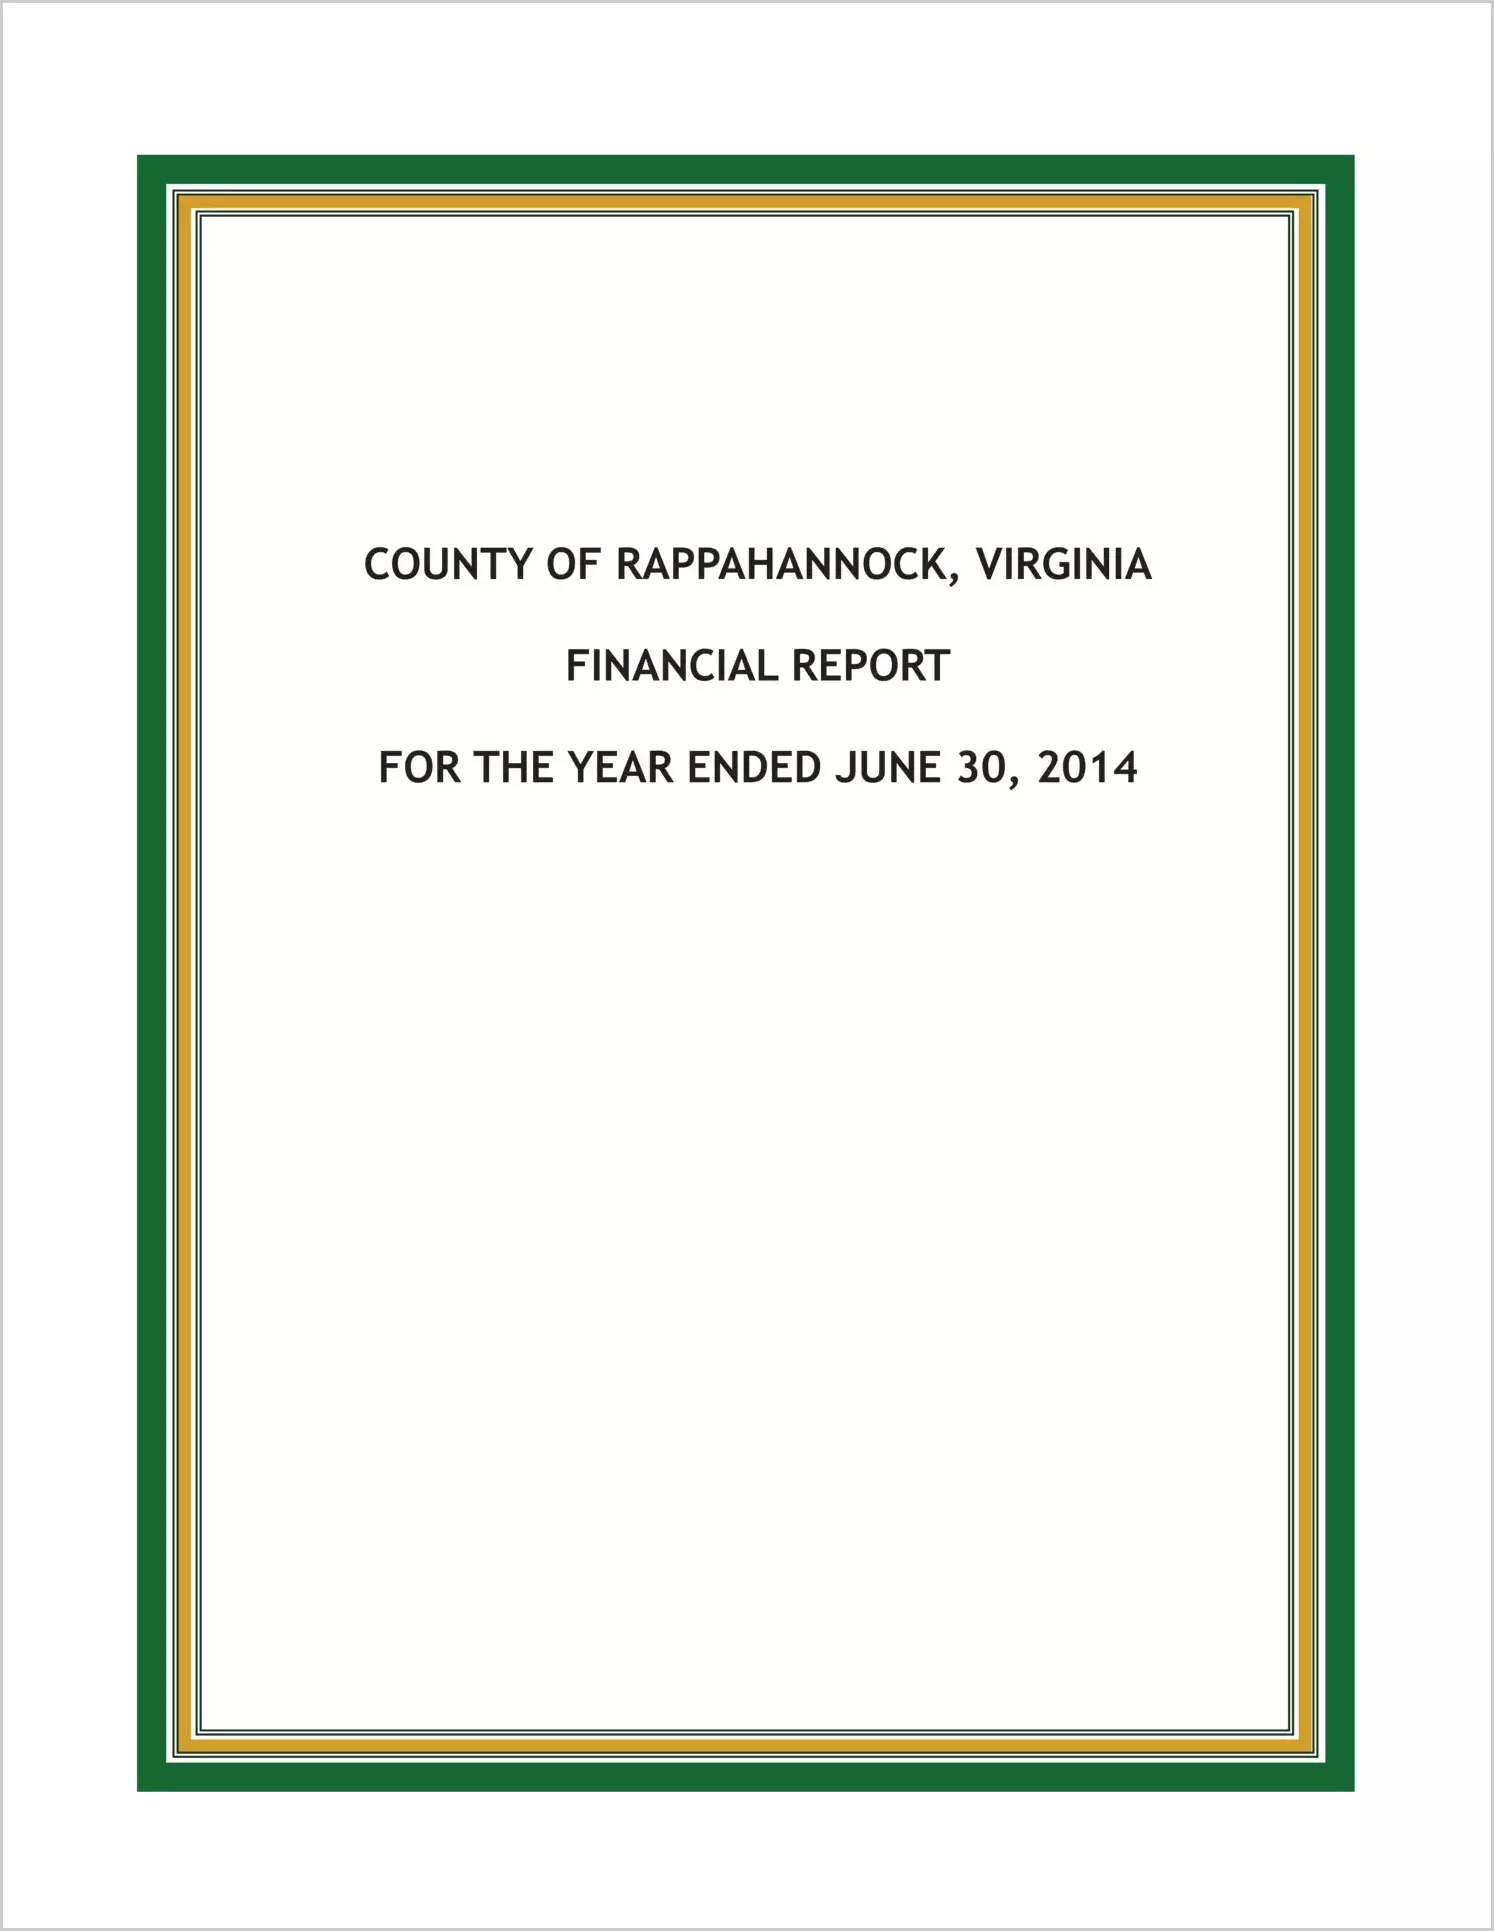 2014 Annual Financial Report for County of Rappahannock